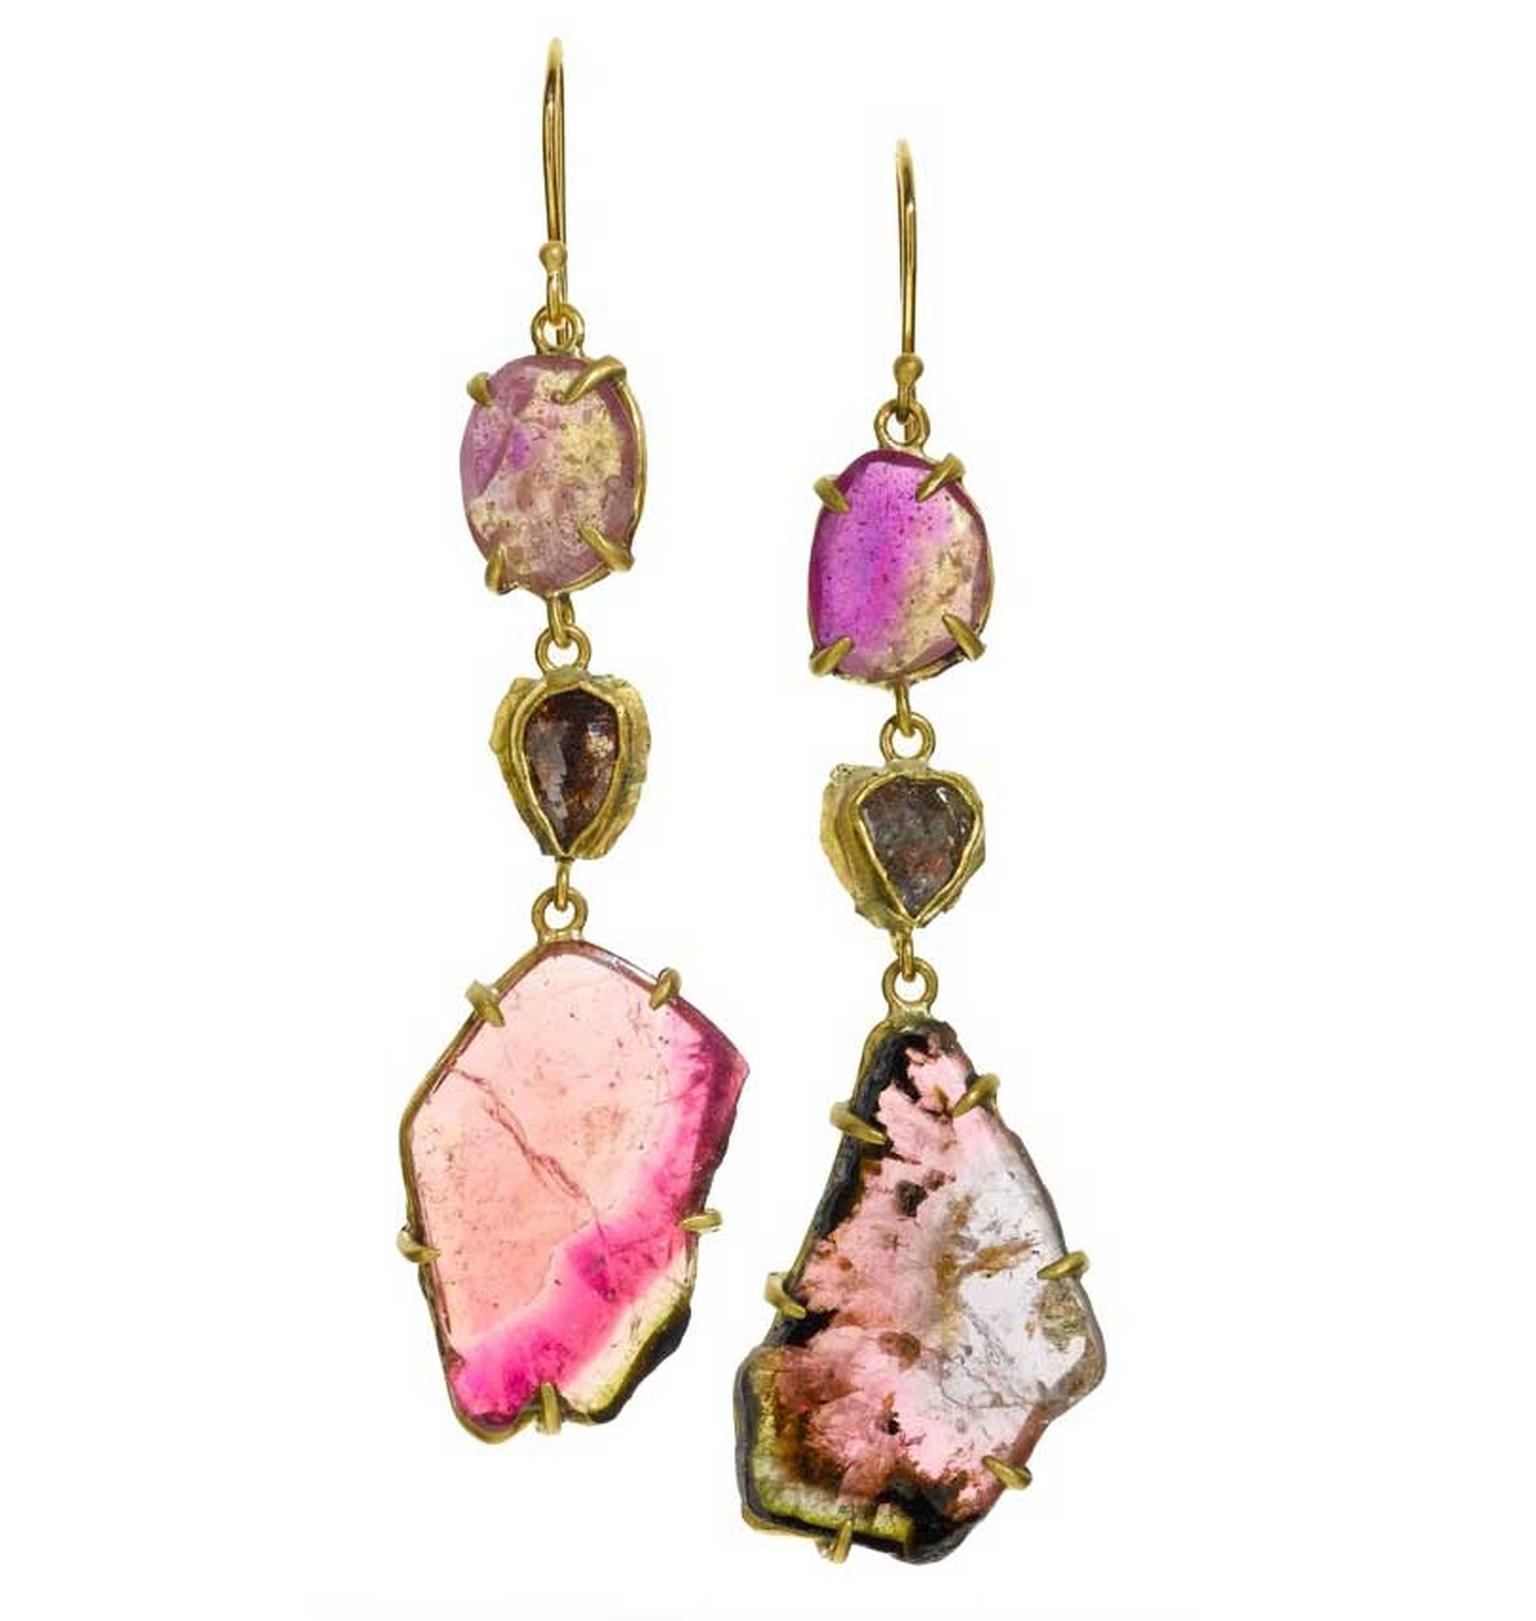 Margery Hirschey is also making her first appearance at the Couture Show Las Vegas with  jewels including these earrings in recycled gold, set with sapphires, diamonds and tourmaline slices